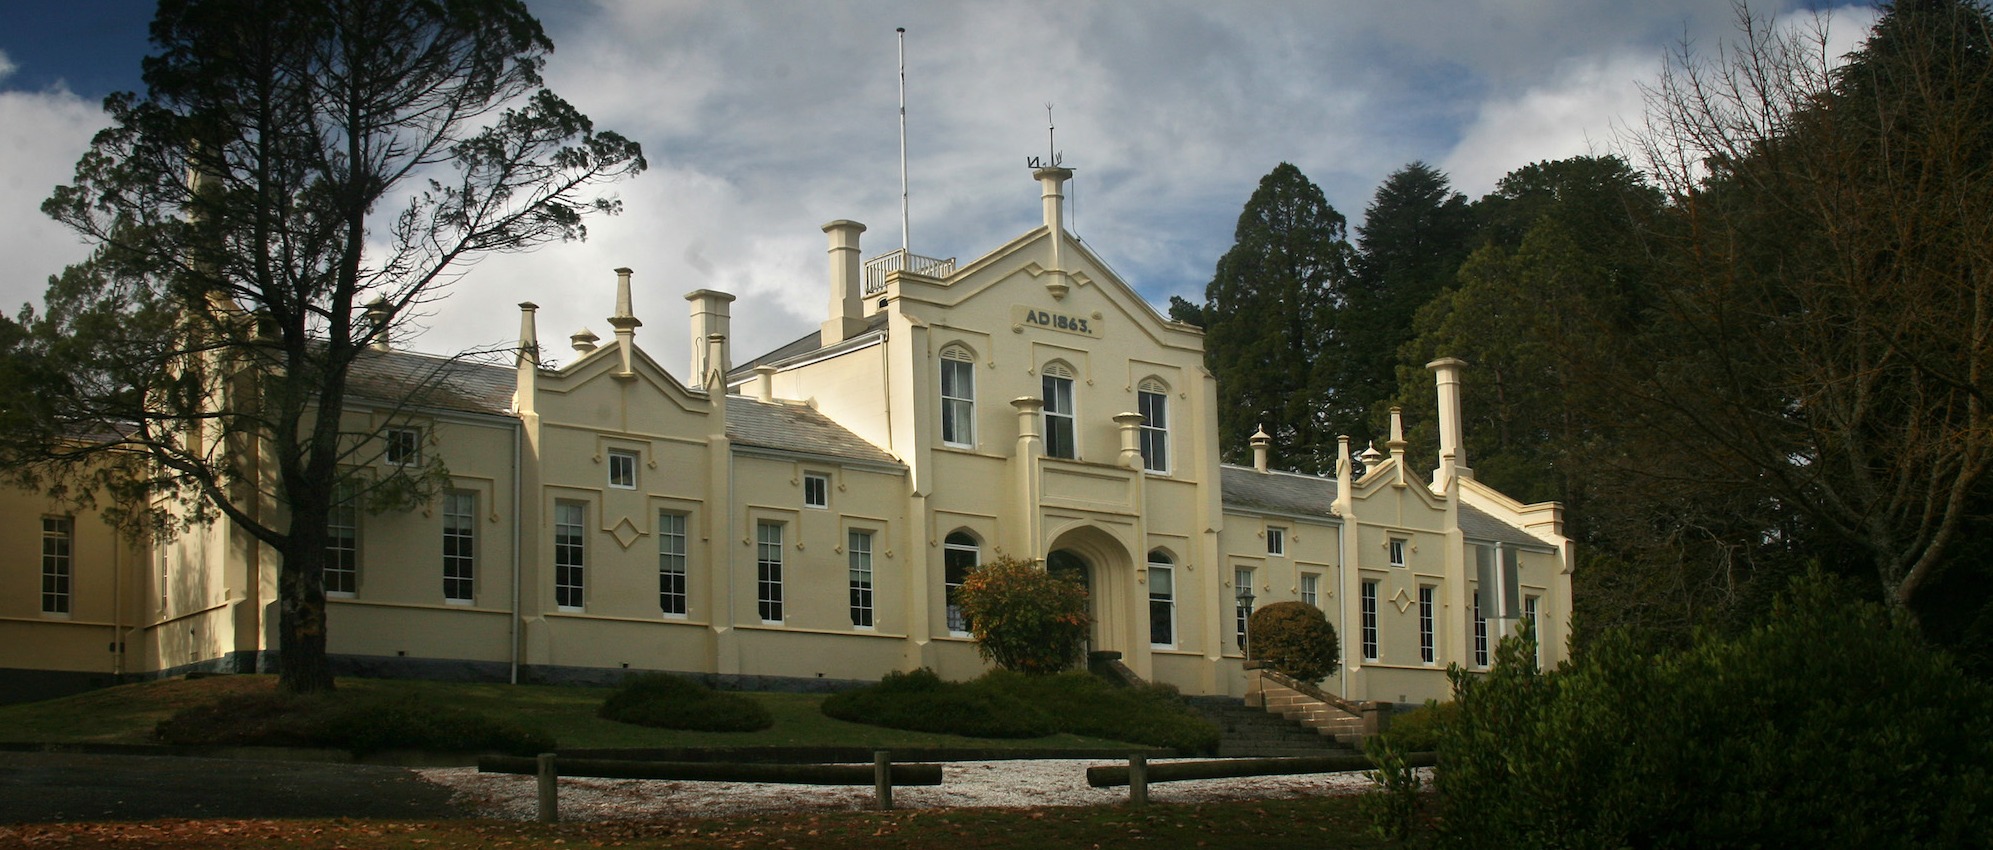 Exterior of Creswick library